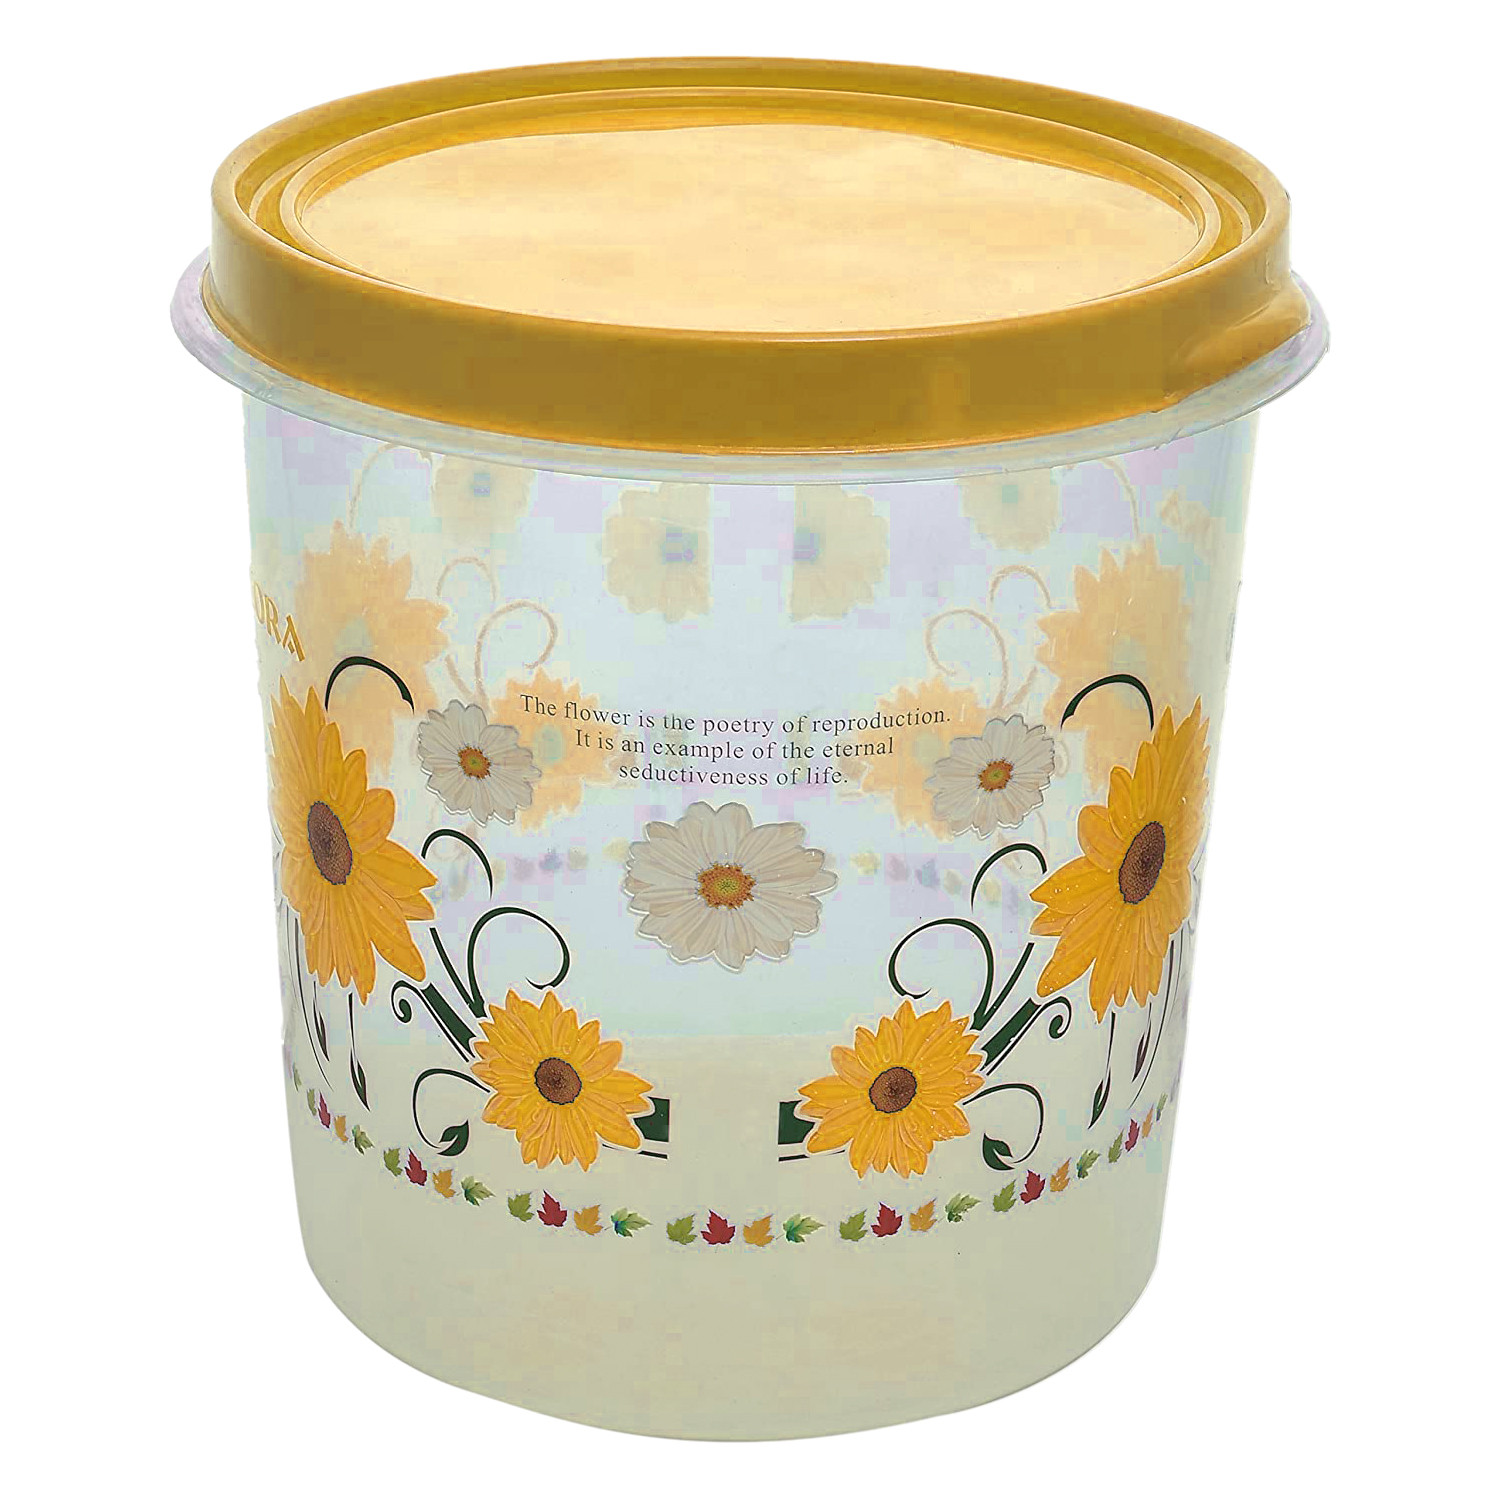 Kuber Industries Storage Container|Durable Plastic Floral Design BPA Free Food Kitchen Organizer With Lid|Food Utility Jar, 7 Ltr (Yellow)